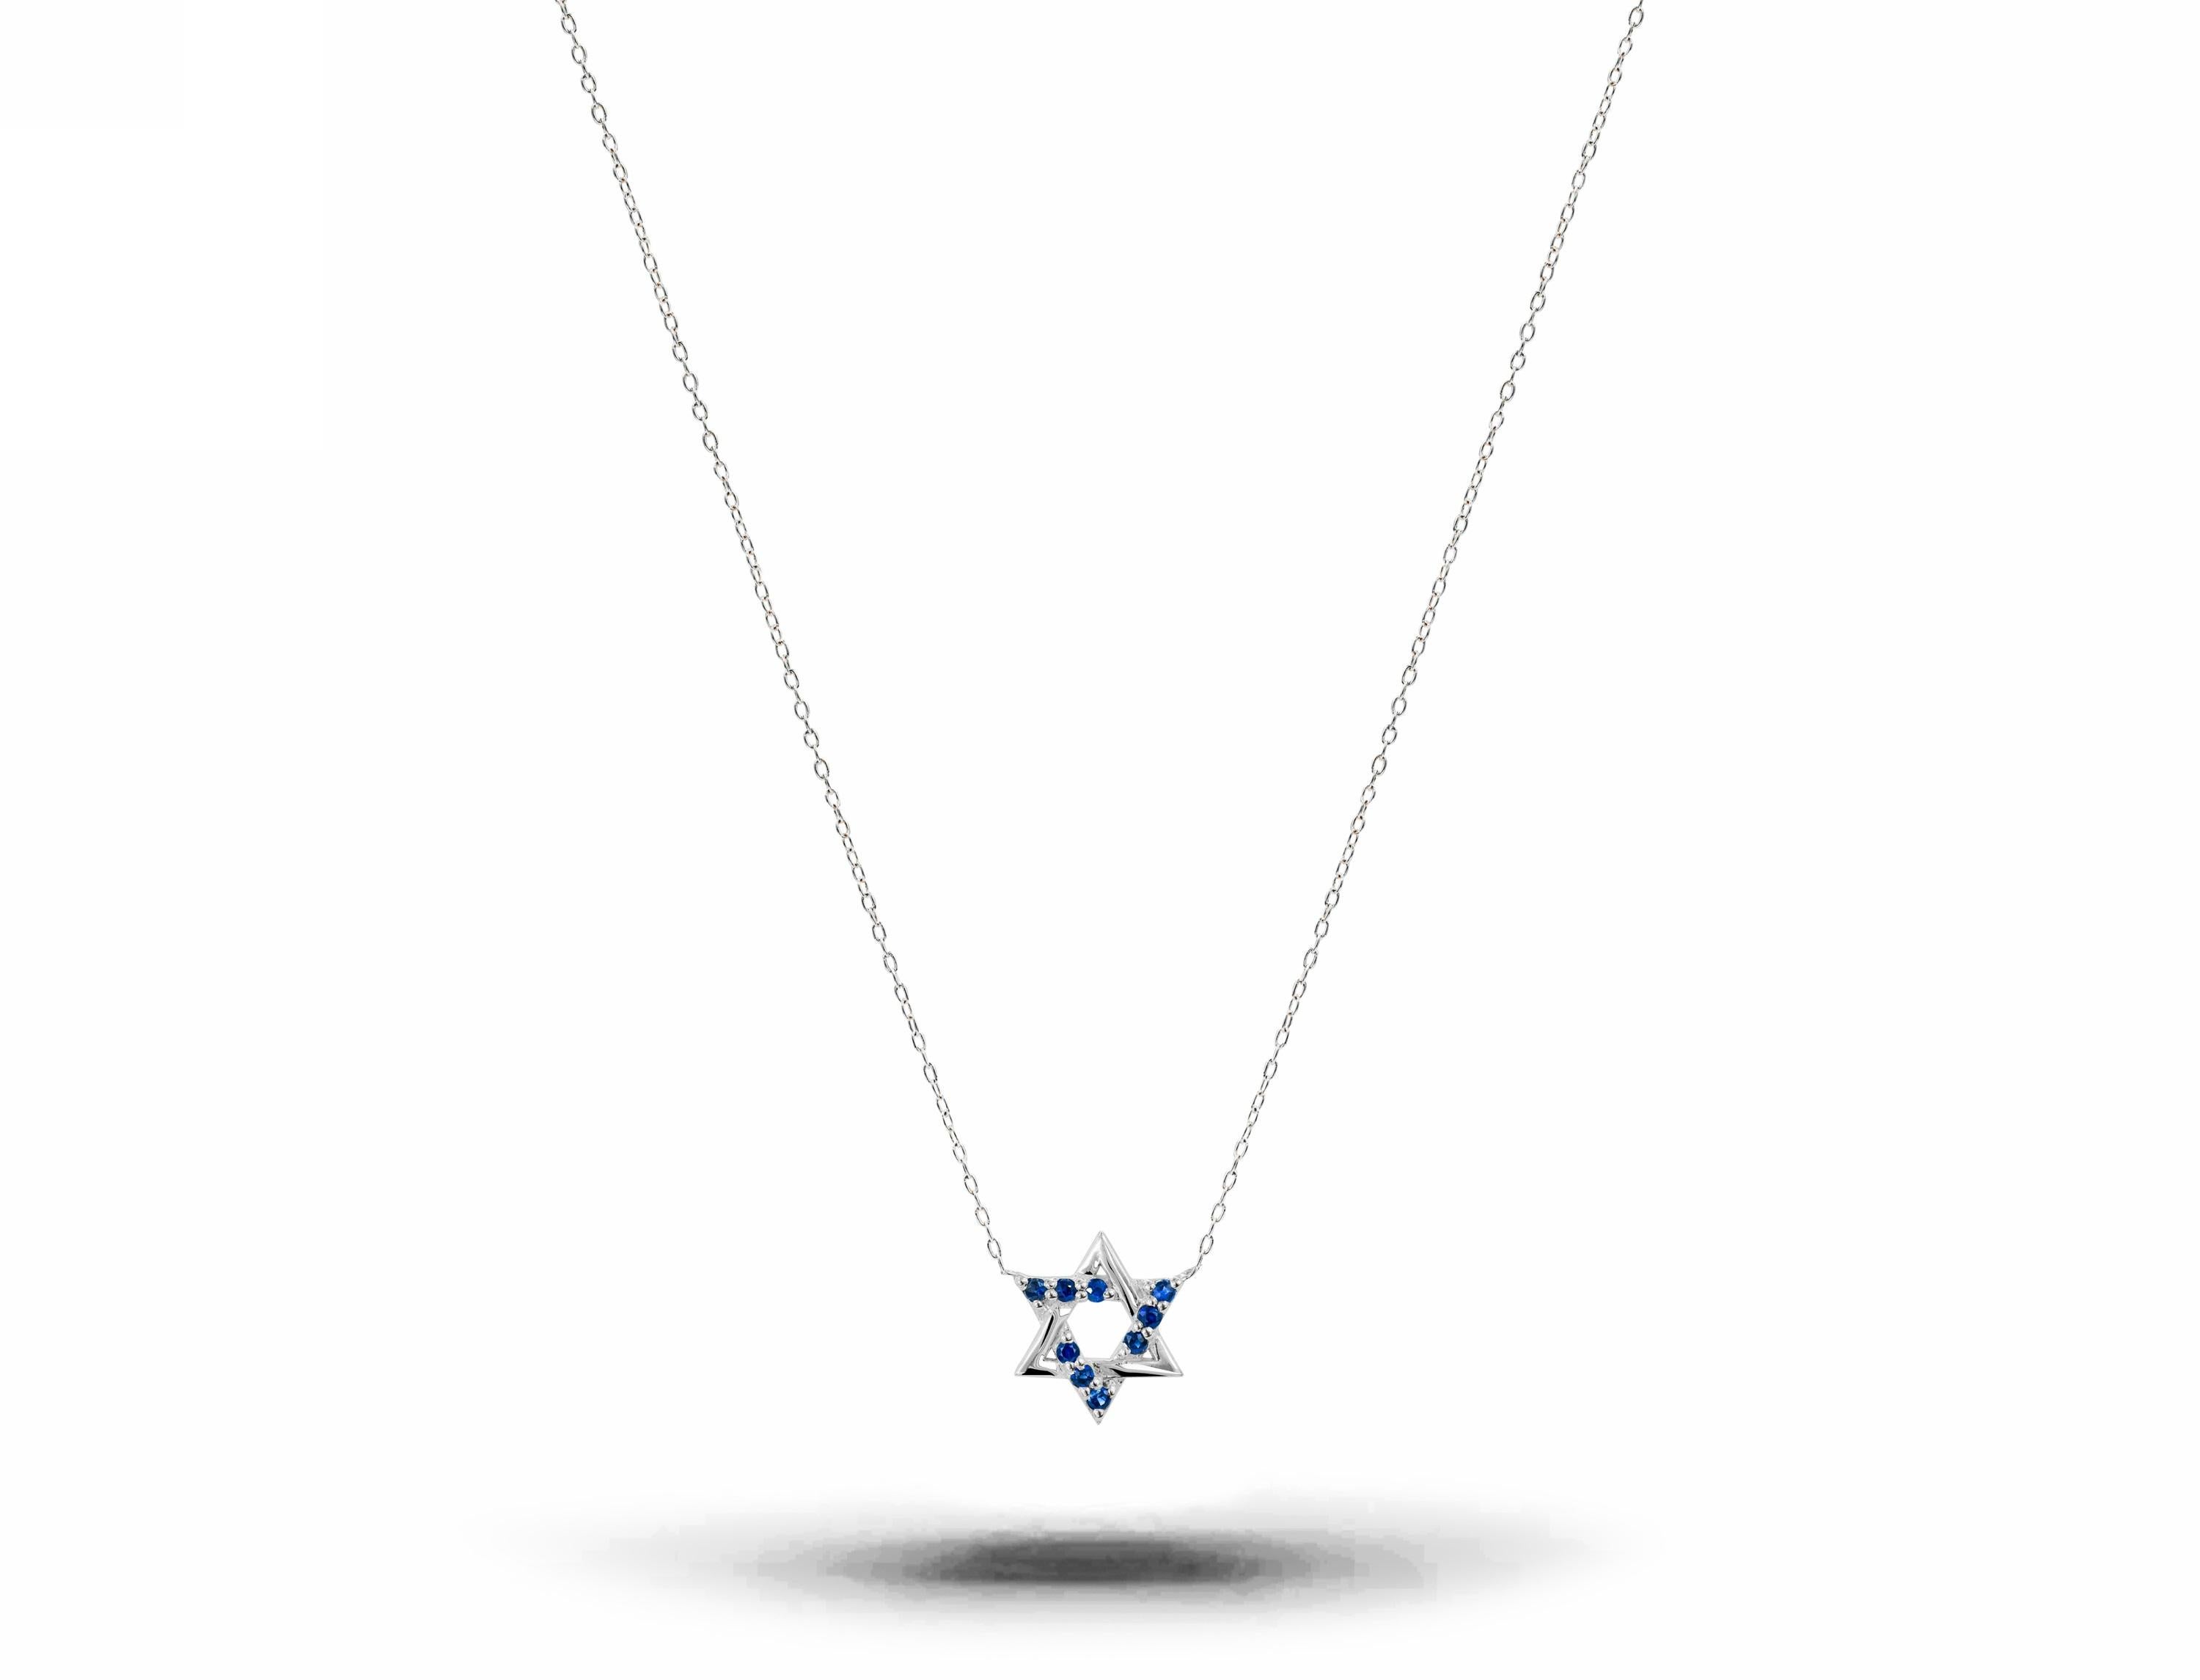 sapphire star necklace